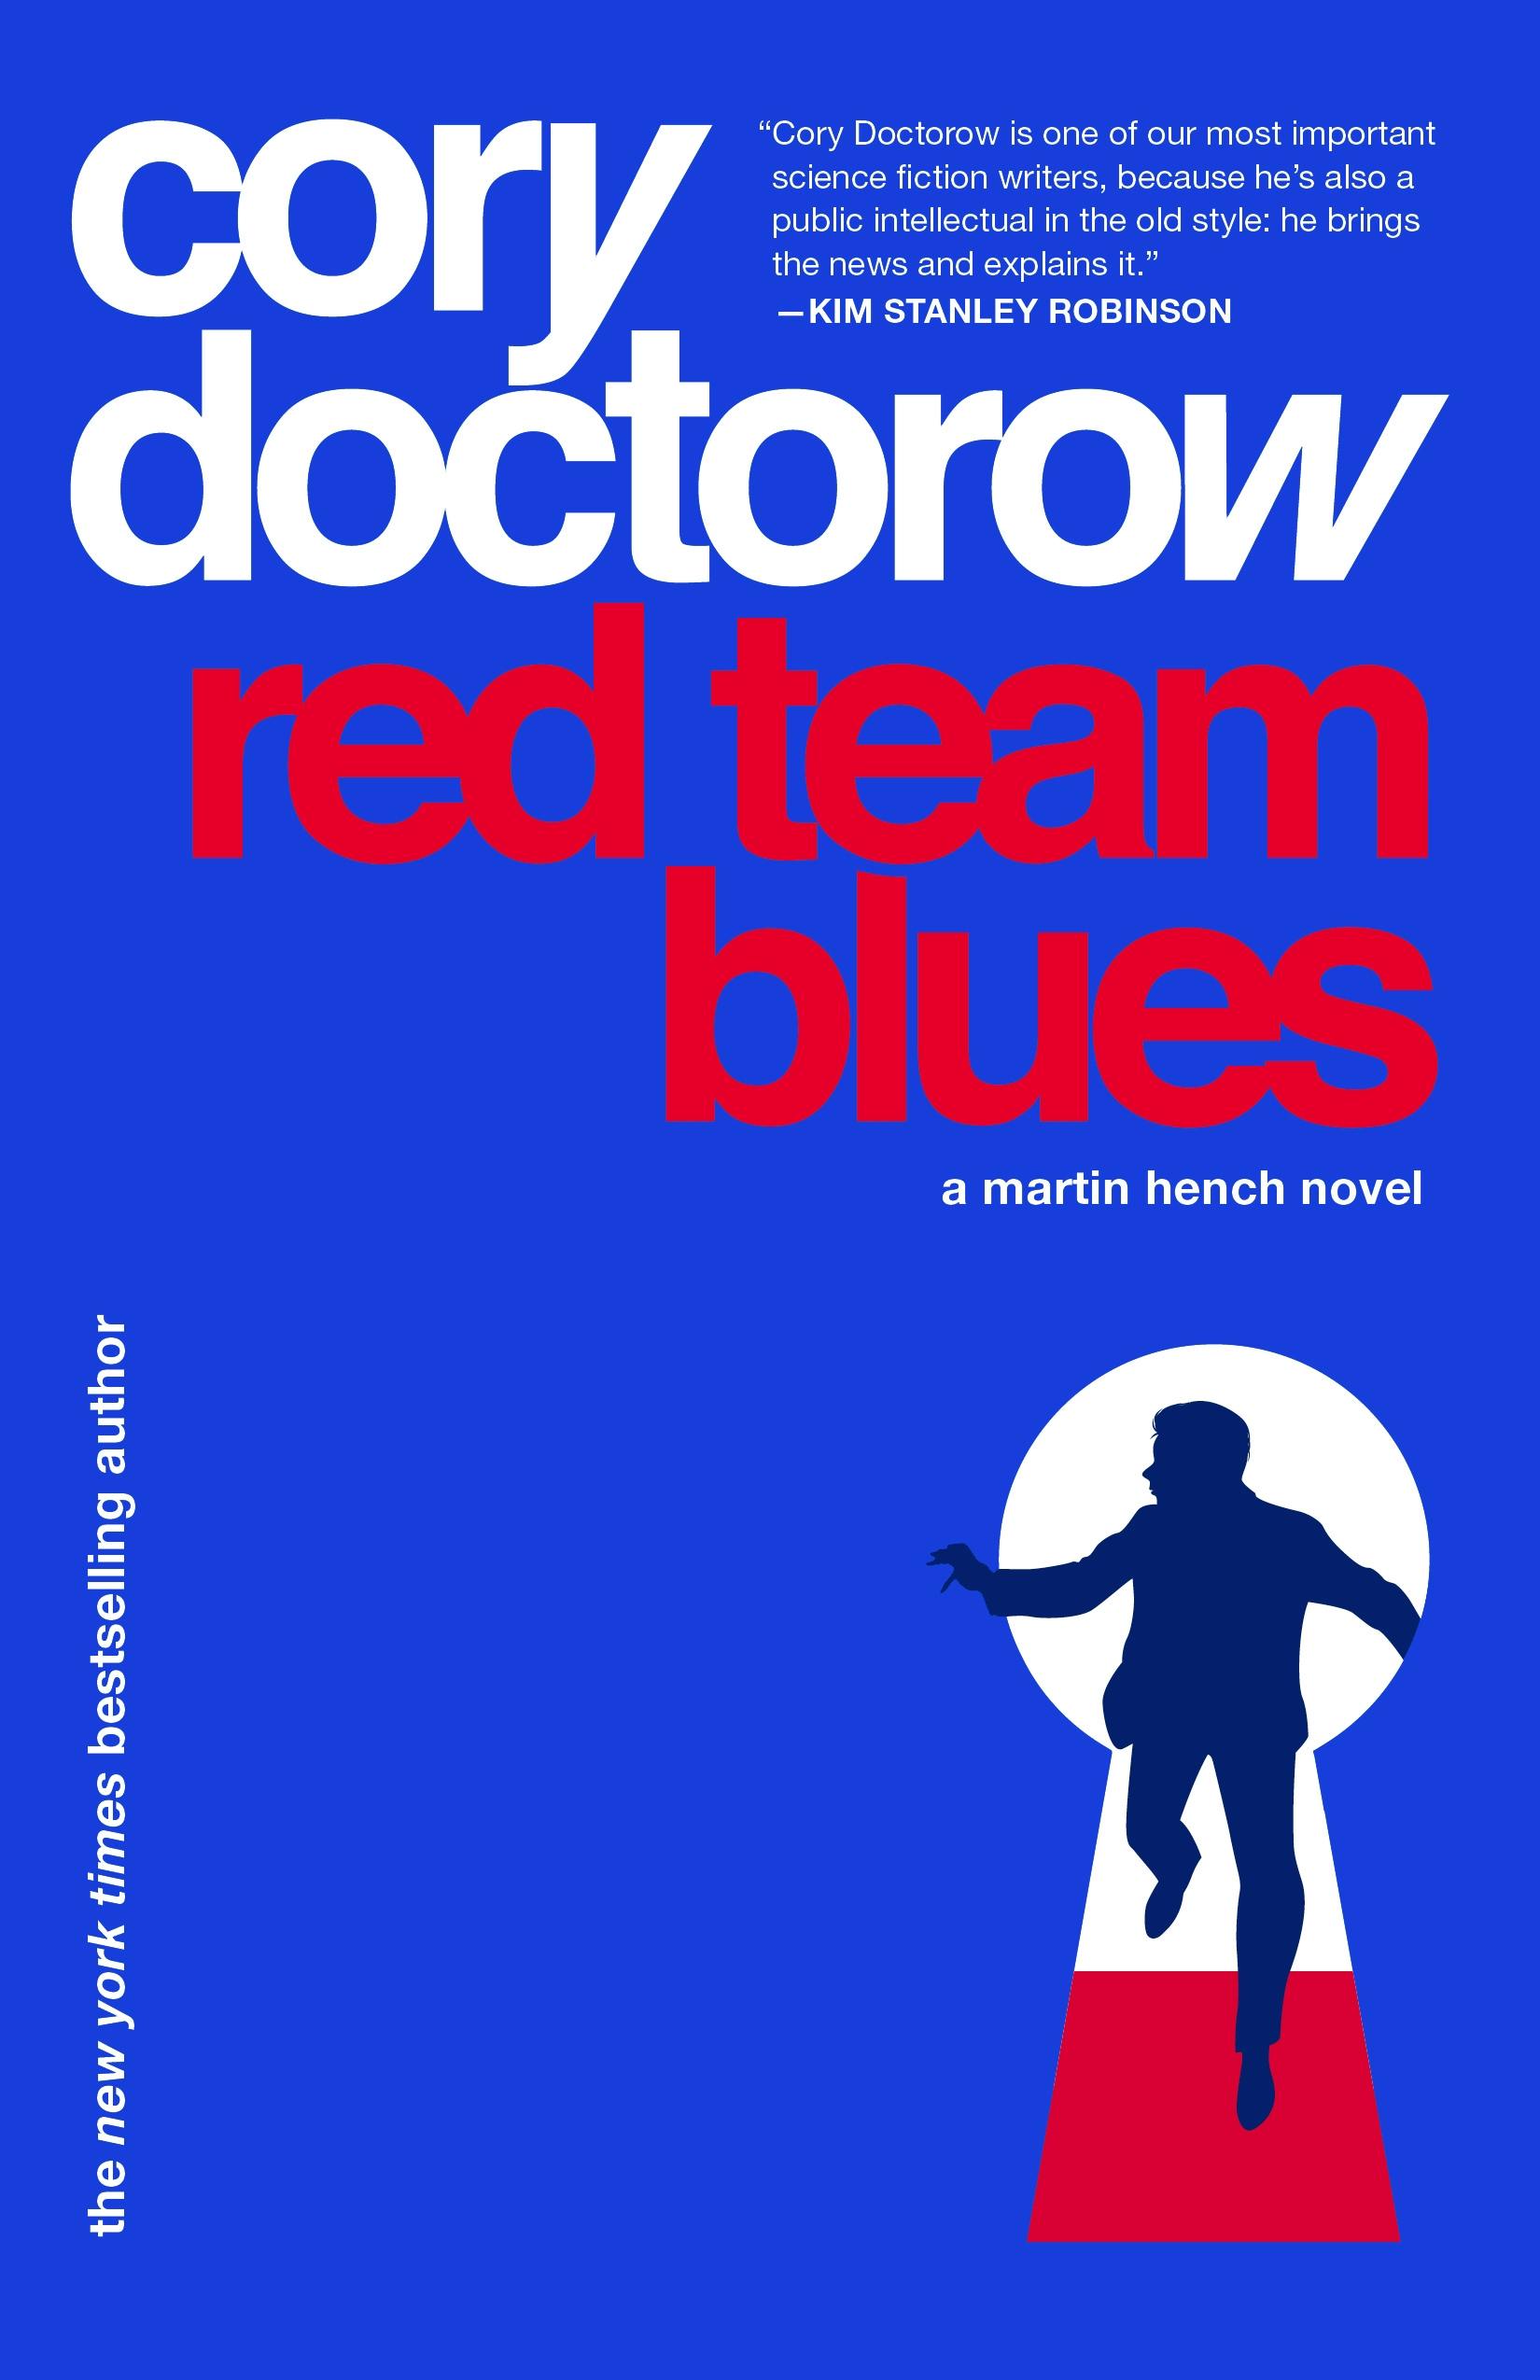 Cover for the book titled as: Red Team Blues